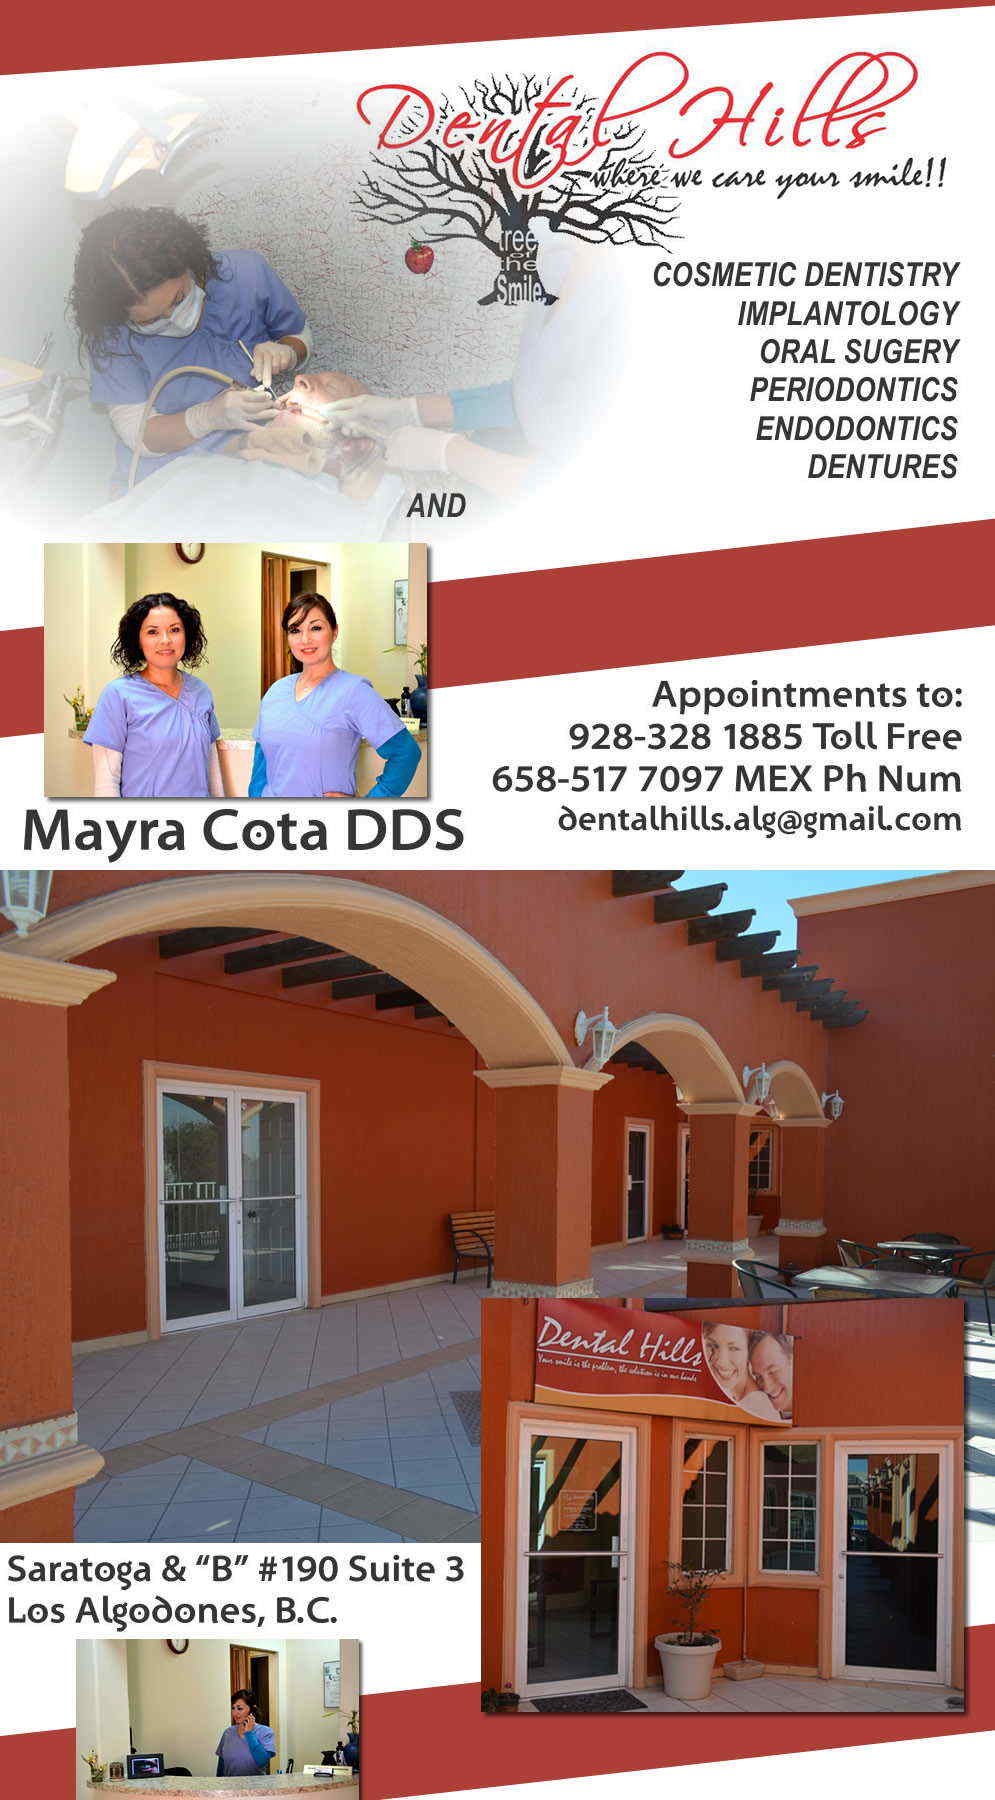 DENTAL HILLS in Algodones  in Algodones  DENTIST MAYRA COTA DDS                 DENTIST PORCELAIN CROWNS CLEANING *EXTRACTIONS *BLEACHING *VENEERS *RELINES (HARD)(SOFT) *IMPLANTS *ROOT CANALS *CROWNS *FILLING *PARTIALS DENTURES X RAYS FREE CLEANING WITH ANY DENTAL PROCEDURE FREE X RAYS WITH ANY DENTAL PROCEDURE SERVICES: CLEANING EXTRACTIONS BLEACHING VENEERS RELINES (HARD)(SOFT) IMPLANTS ROOT CANALS  FILLING PARTIALS DENTURES X RAYS FREE CLEANING WITH ANY DENTAL PROCEDURE                